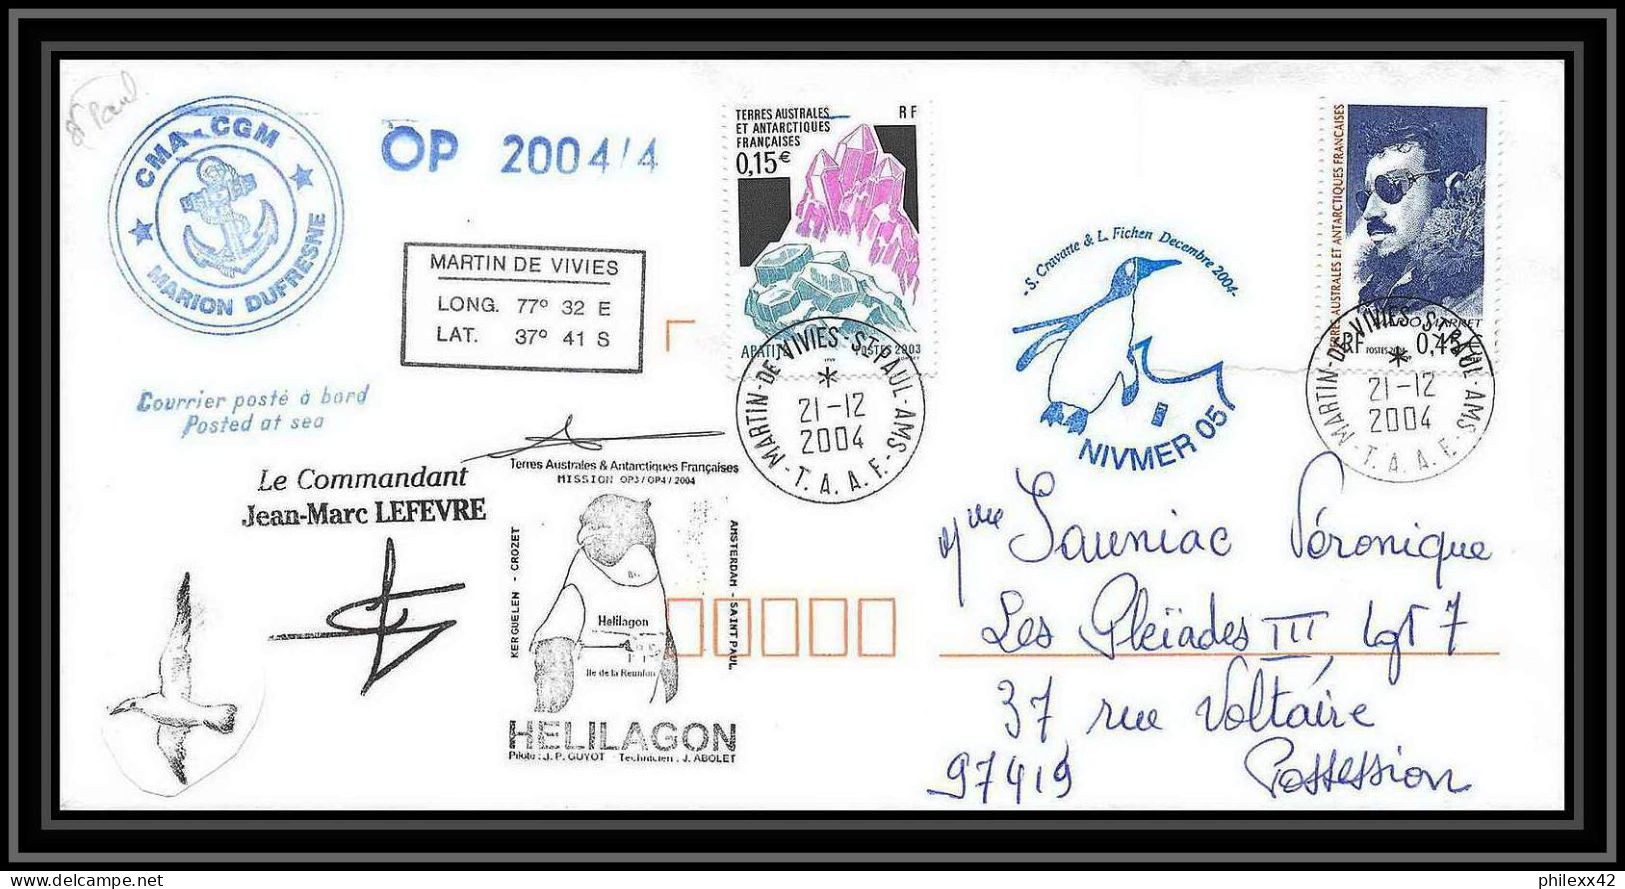 2482 ANTARCTIC Terres Australes TAAF Lettre Cover Dufresne 2 Signé Signed OP 2004/4 N°391 21/12/2004 Helilagon - Helicopters